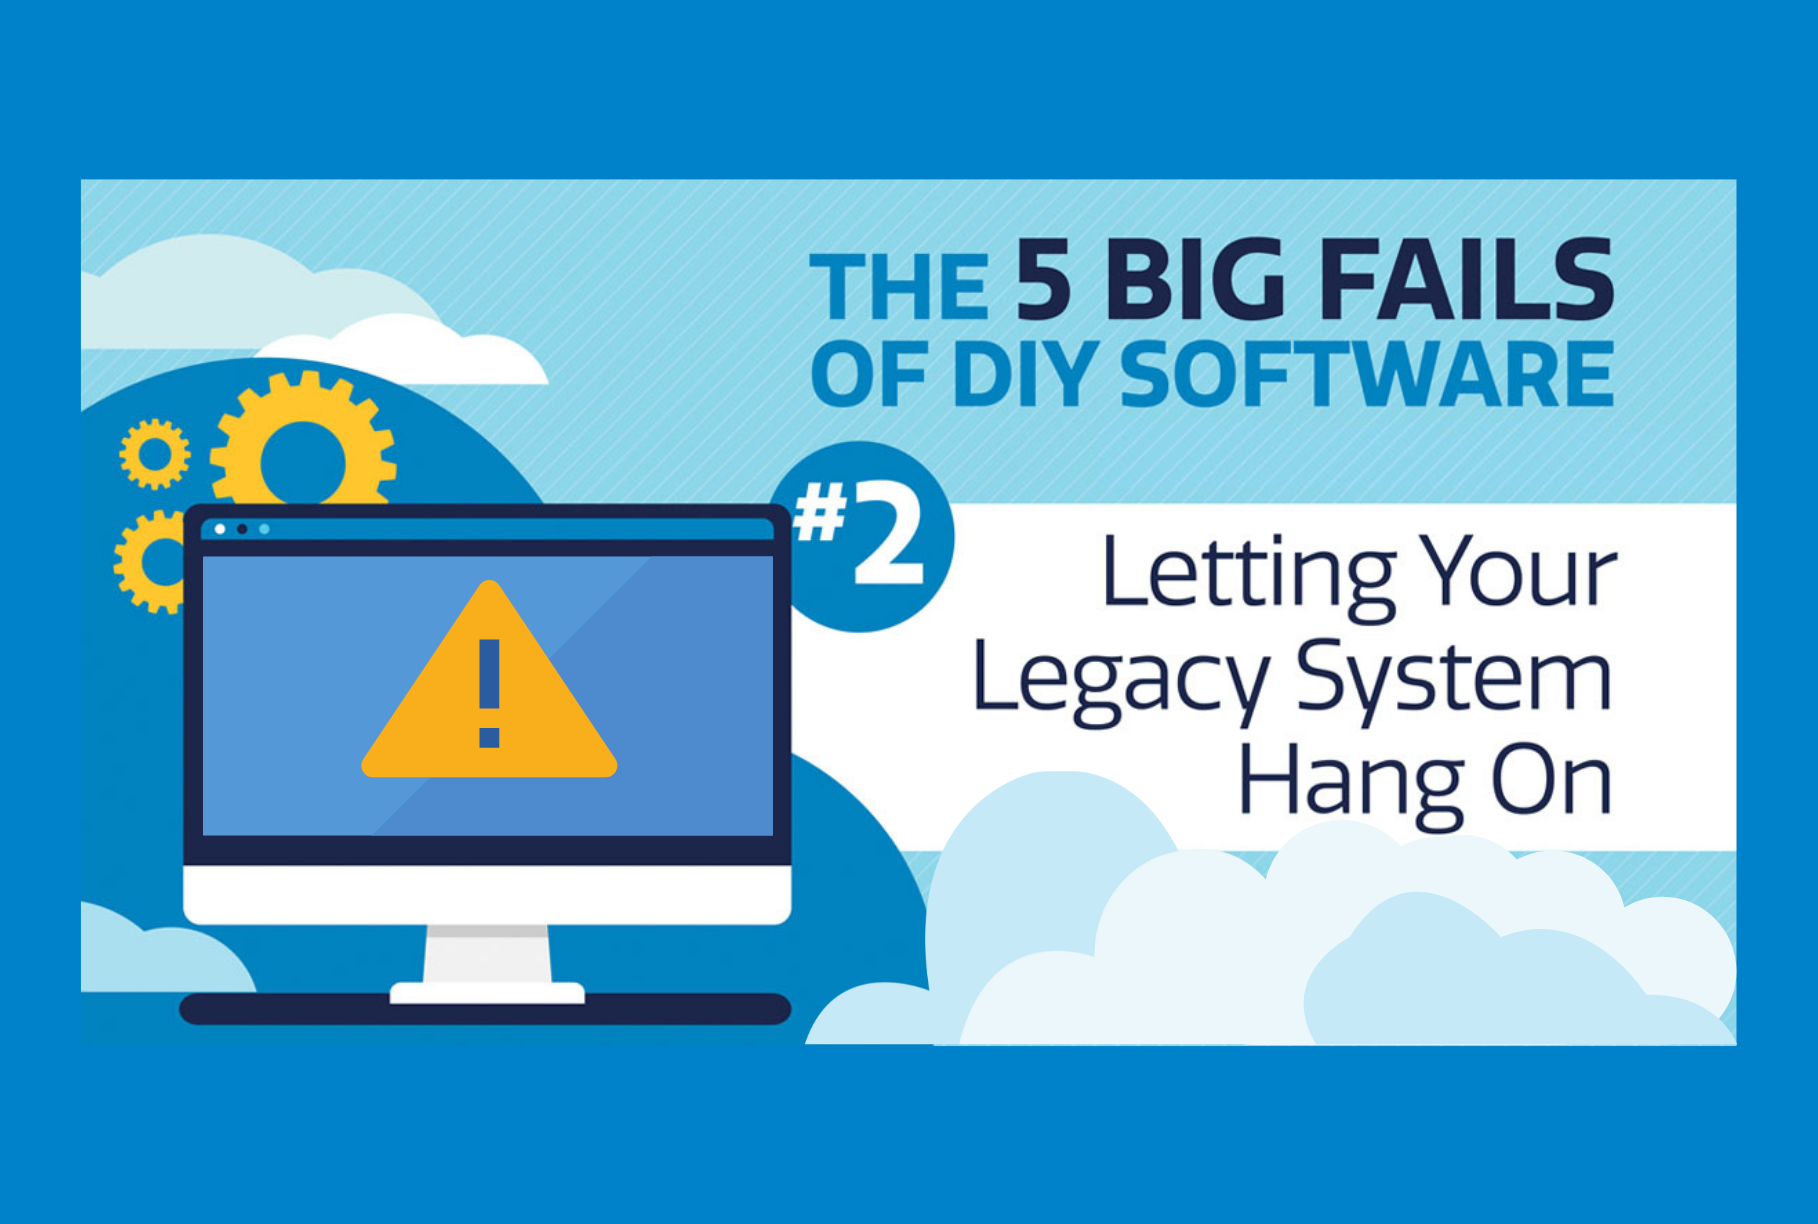 The 5 Big Fails of DIY Software: #2: Letting Your Legacy System Hang On